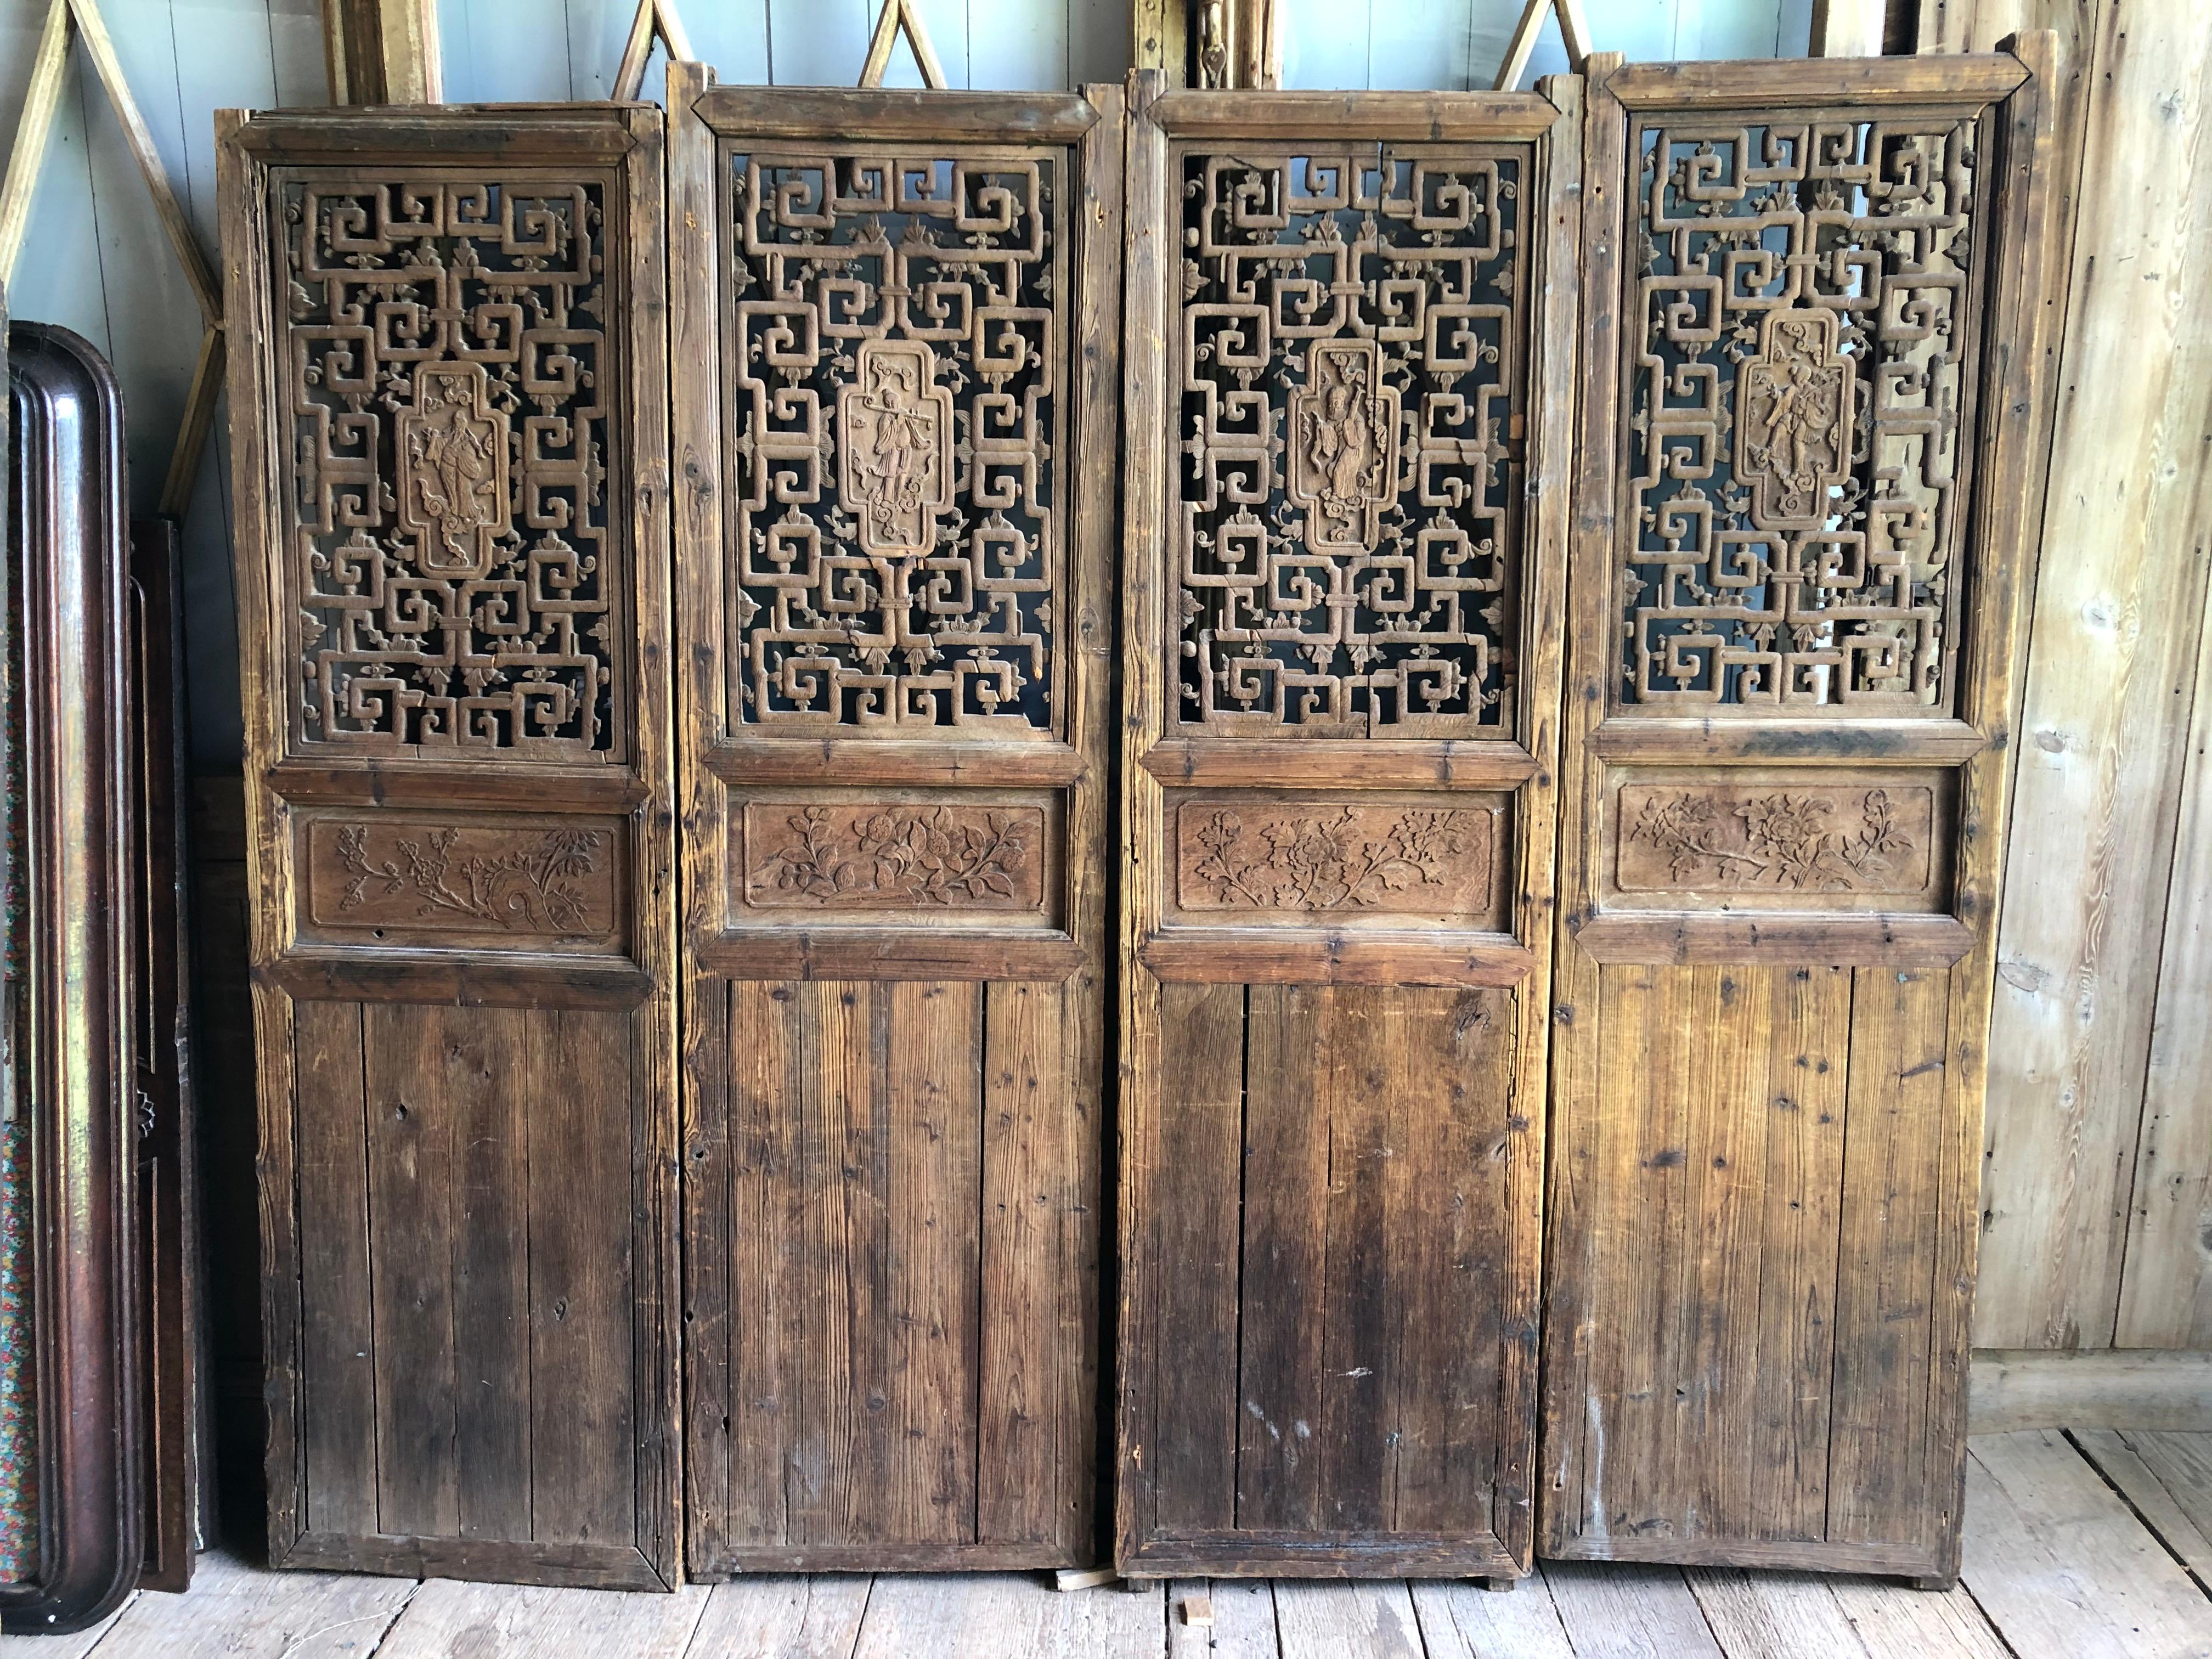 A nice set of 4 carved Chinese doors with pierced decorative panels on the upper half, each with a carved center panel depicting male and female figures. The doors are in pine or cedar and have solid panels on the back that slide up to cover the